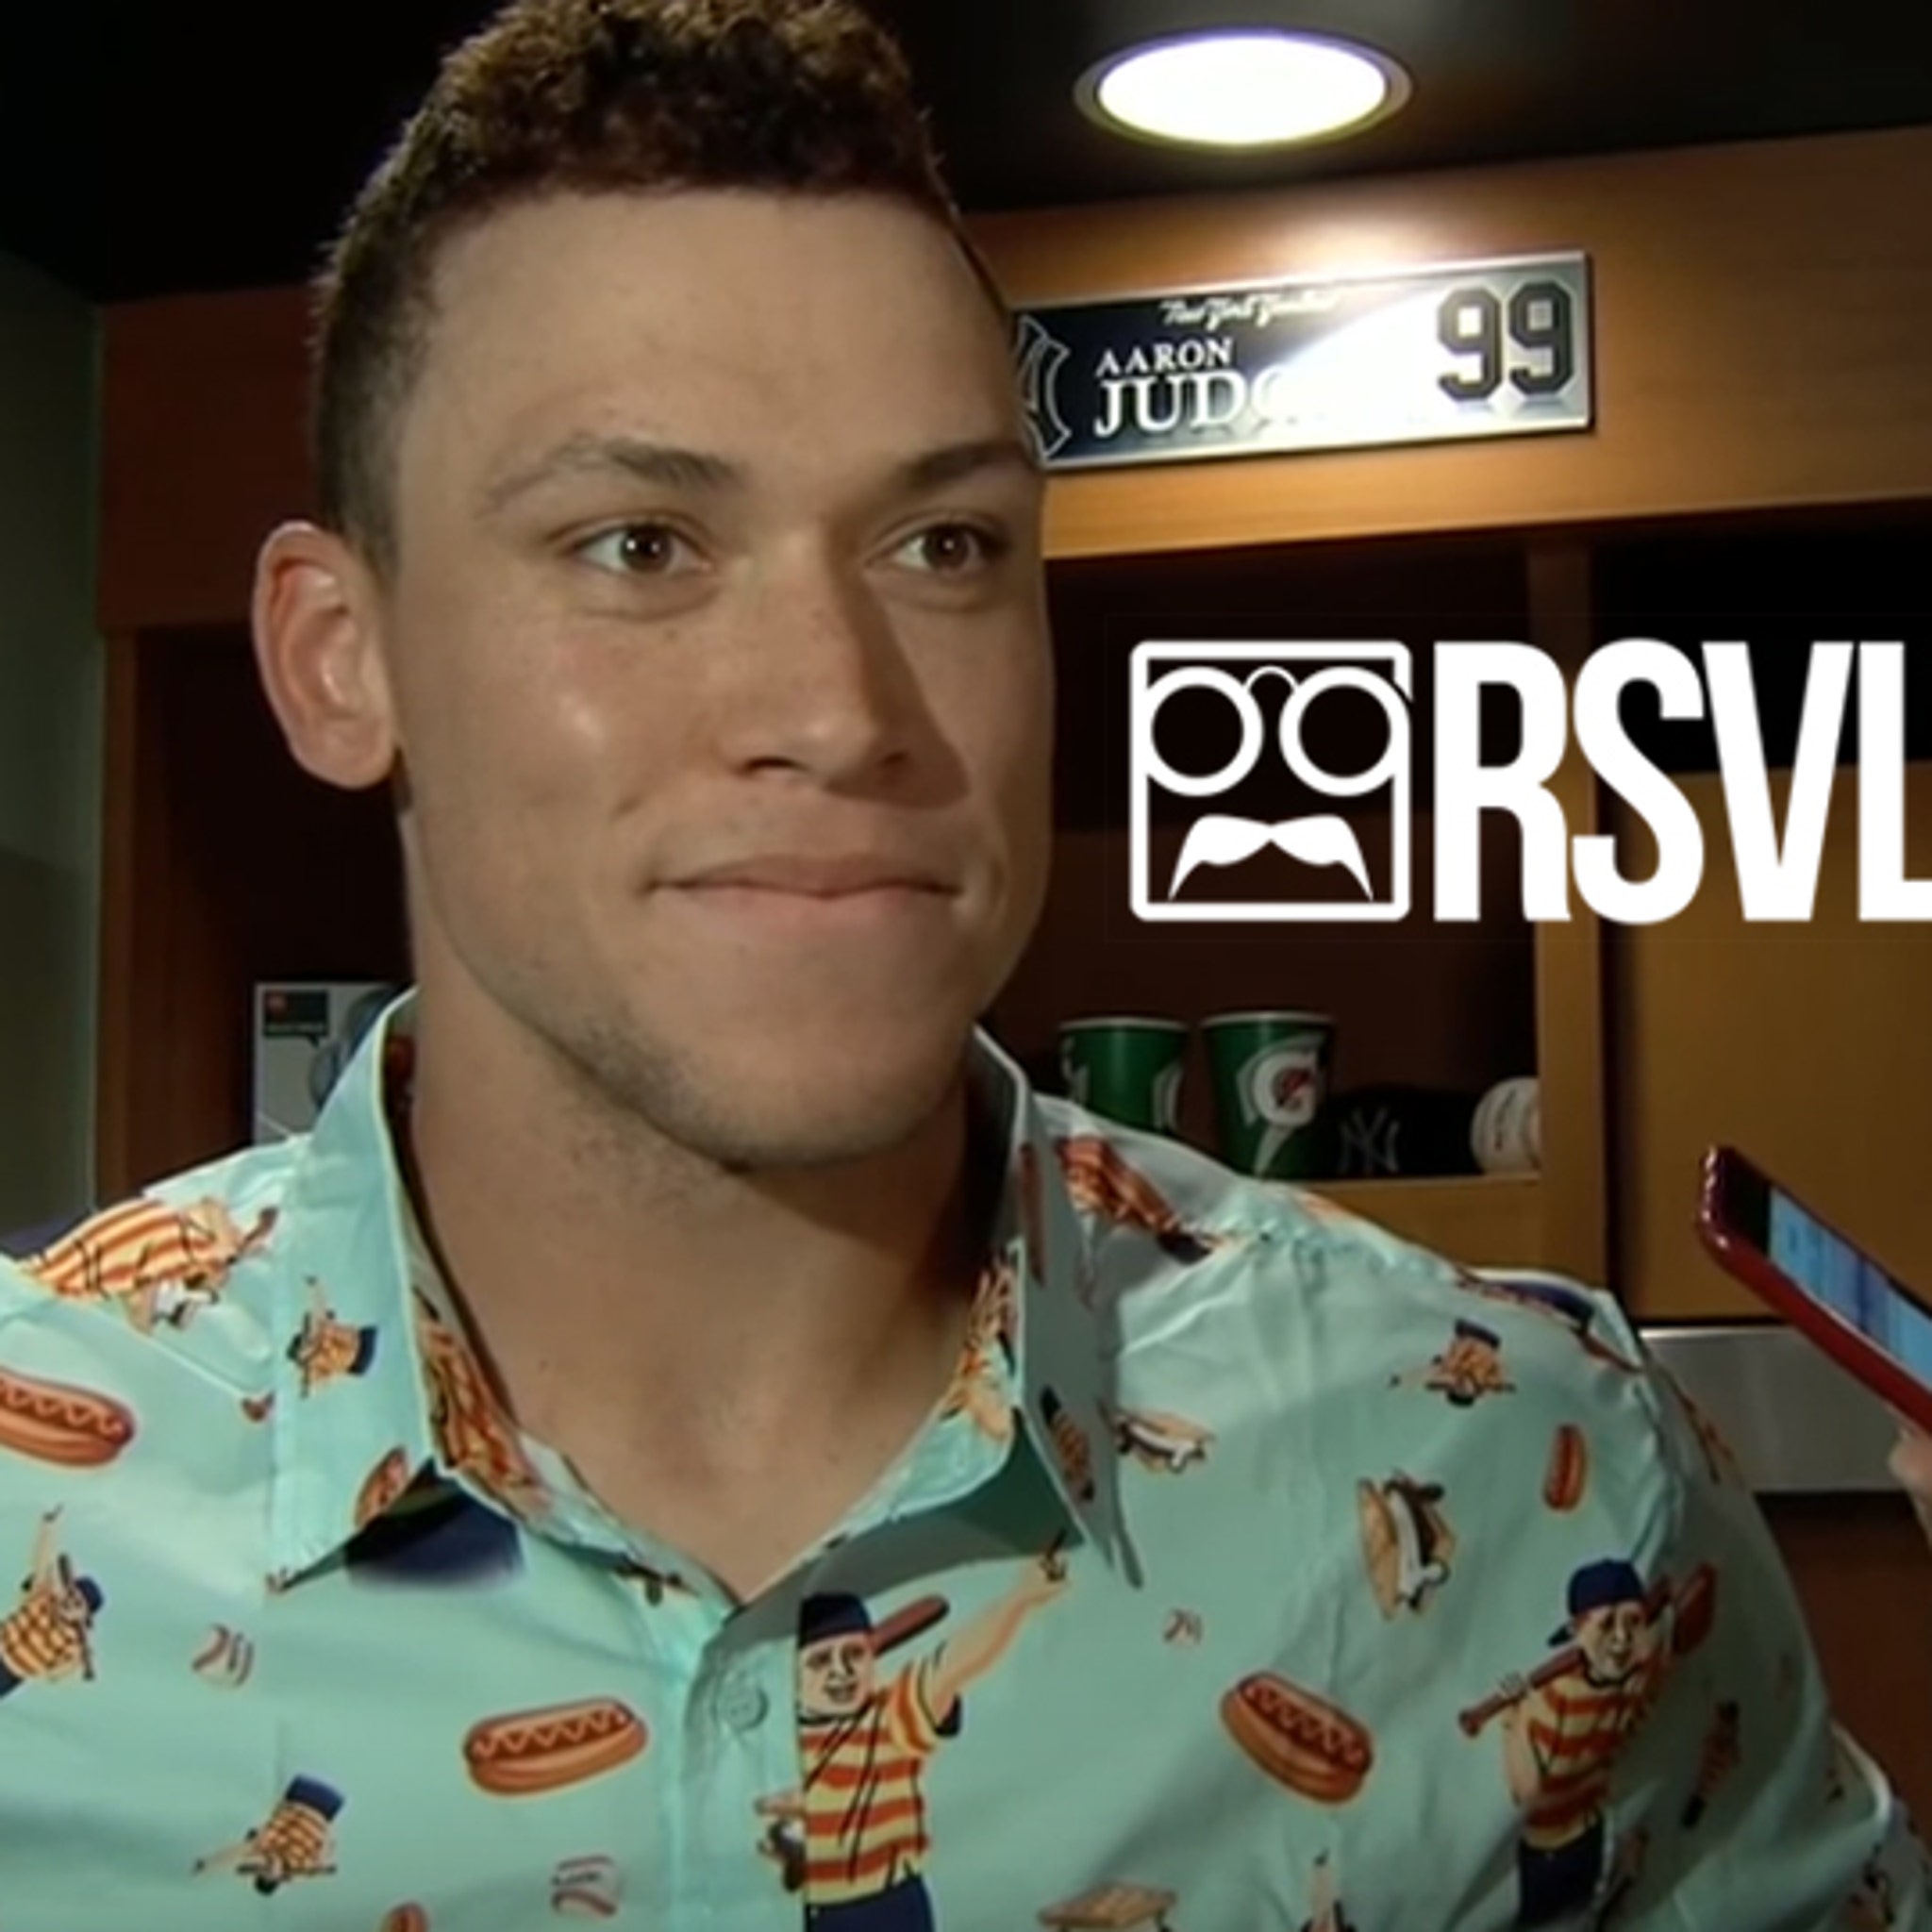 aaron judge without a shirt